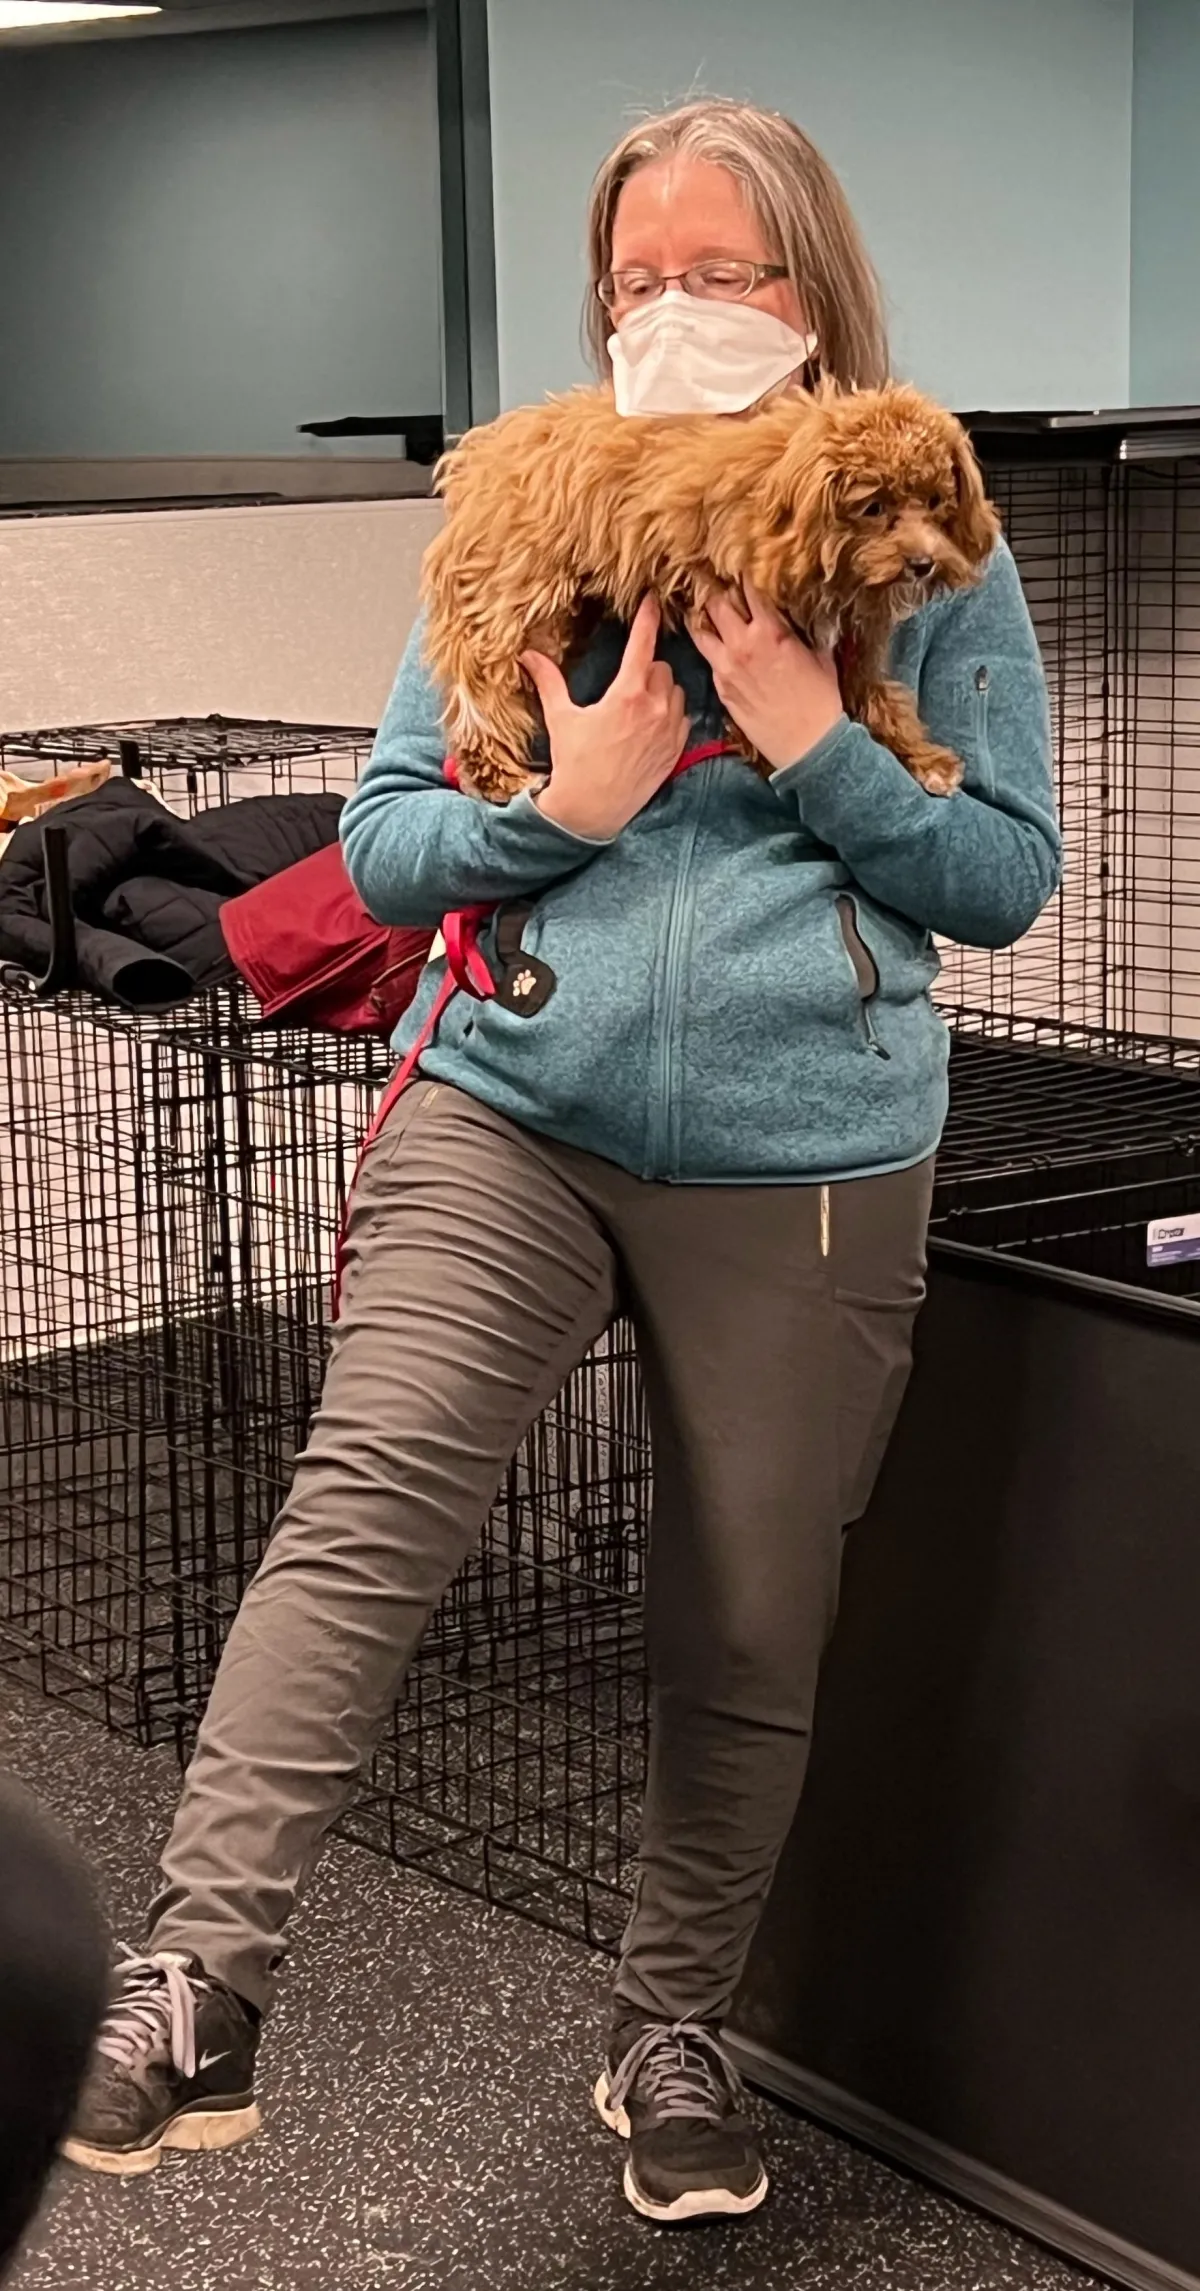 A woman stands on one foot in front of some empty dog crates. She wears a respirator mask, a teal jacket, gray pants, & sneakers. She holds a small, wavy haired, toasty brown colored puppy in front of her chest.